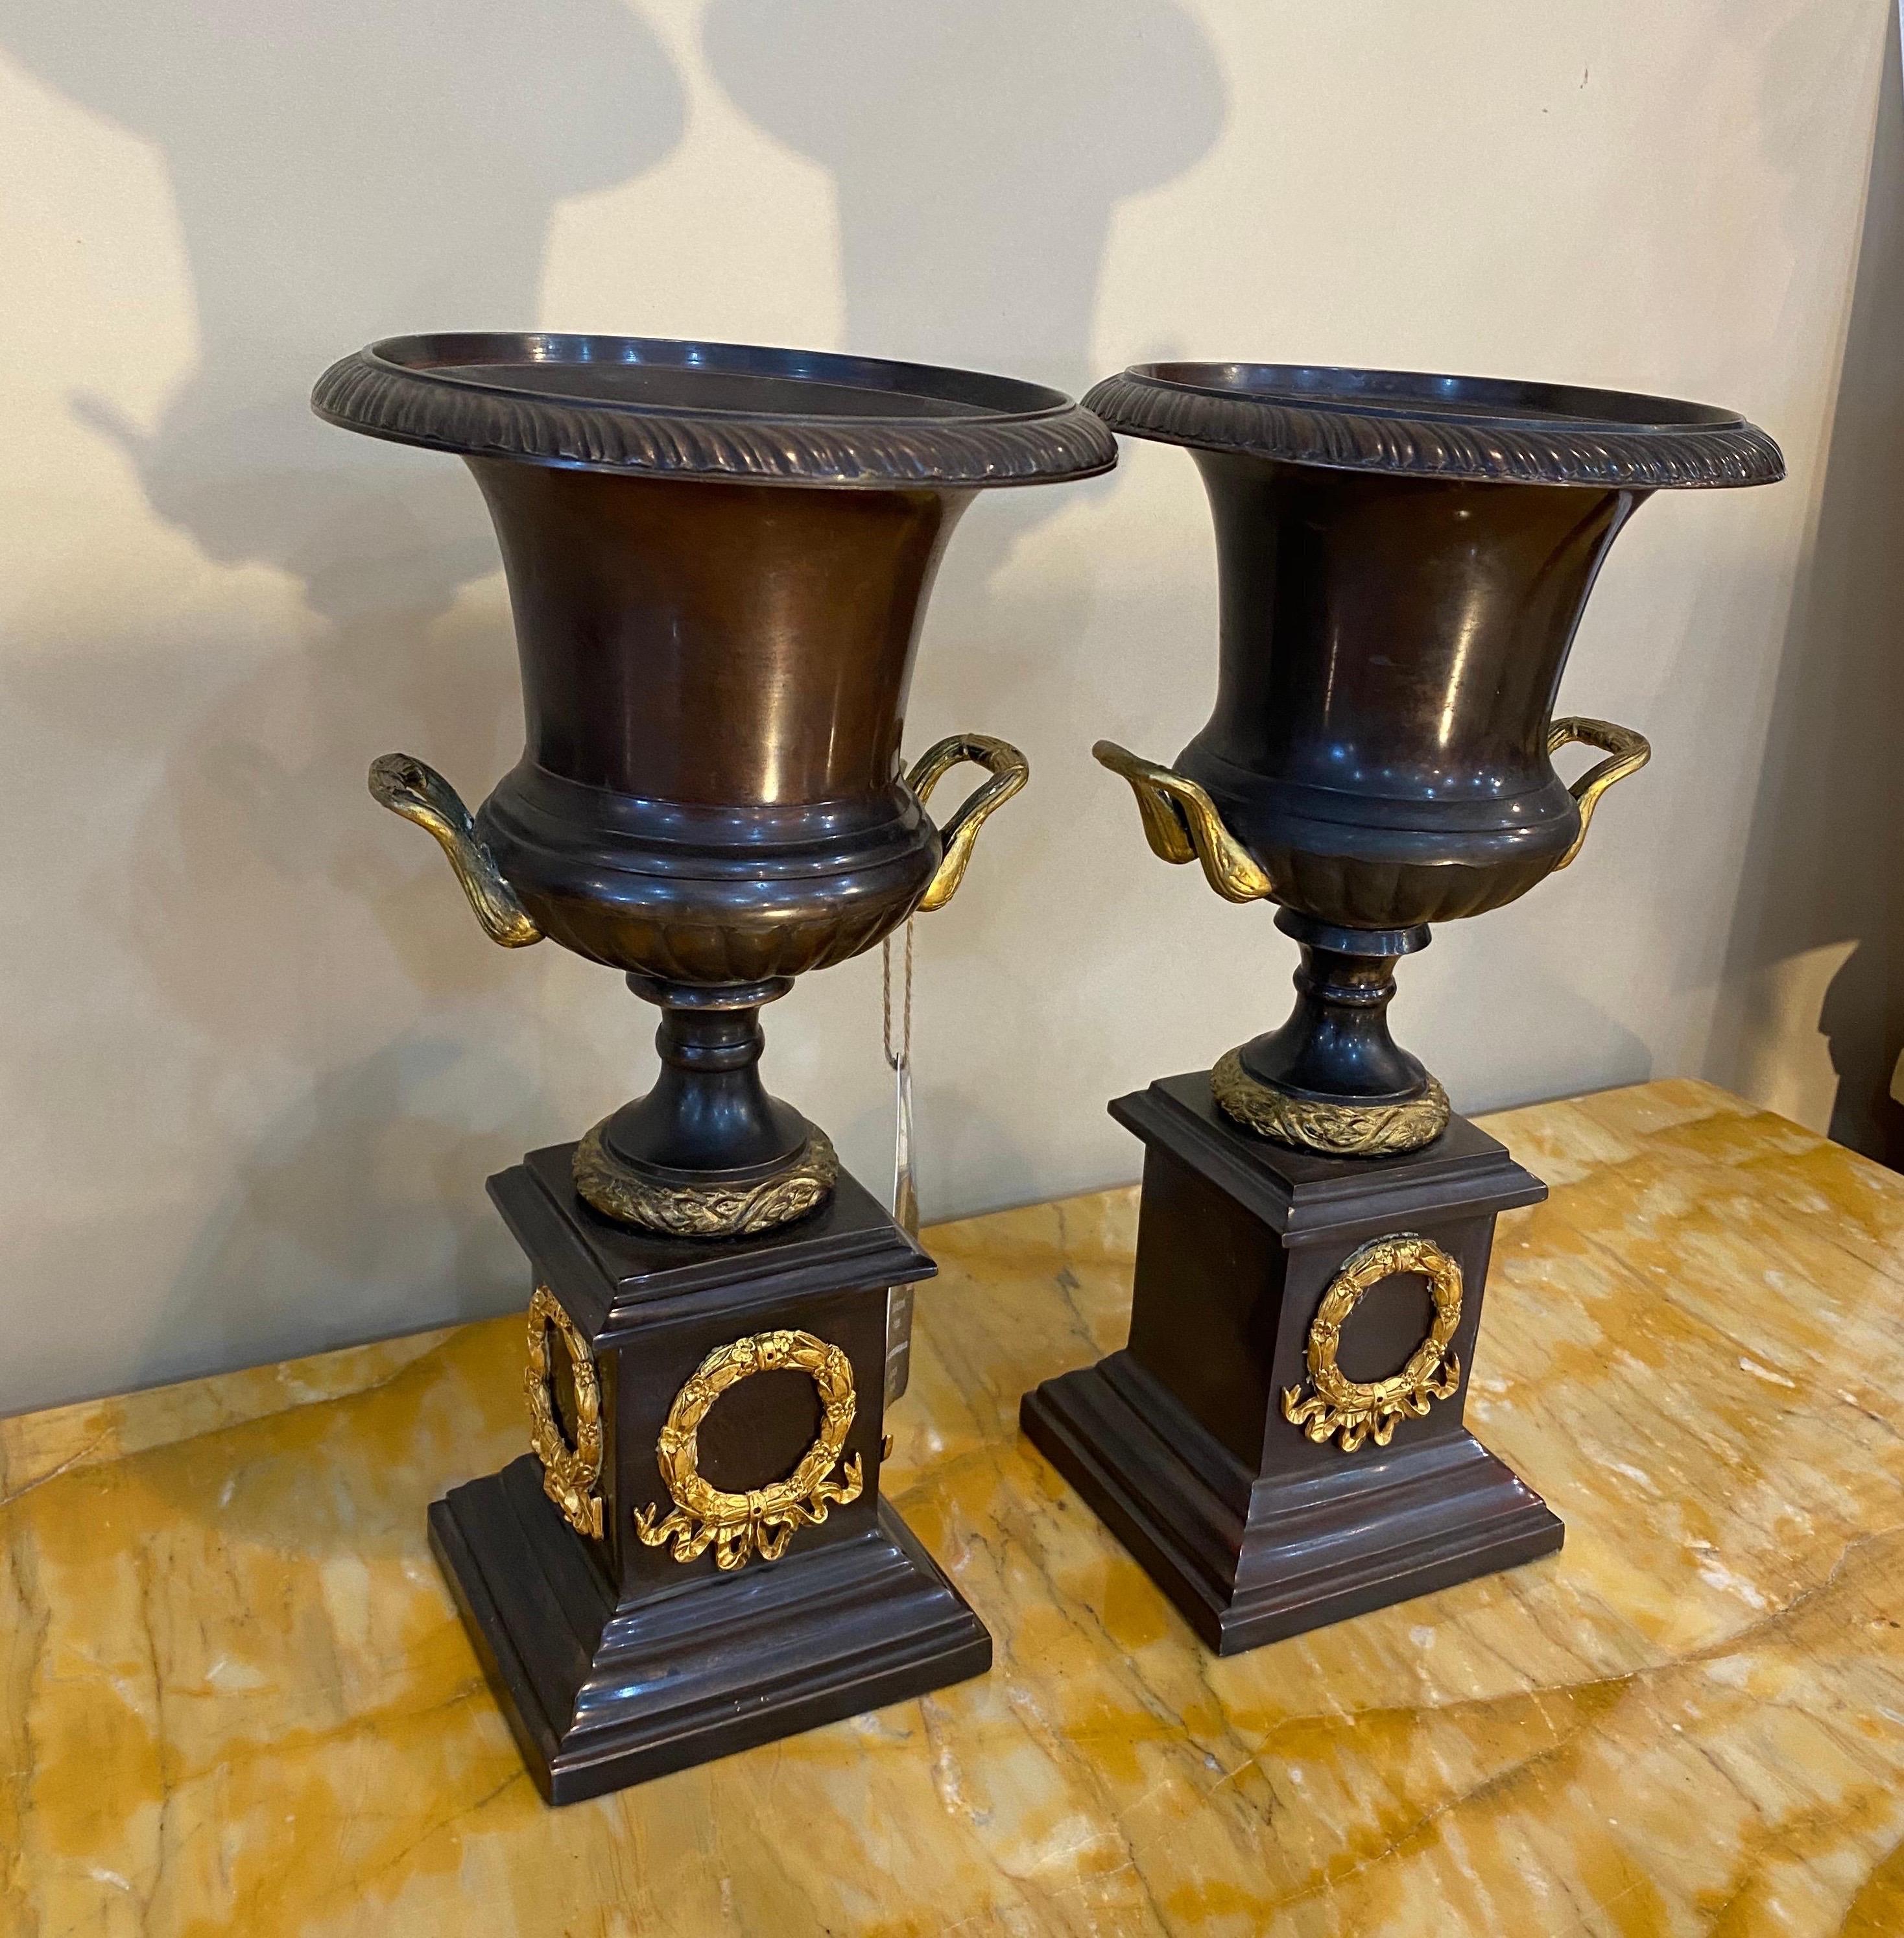 Pair of neoclassical style bronze urns. Great castings and mounts.